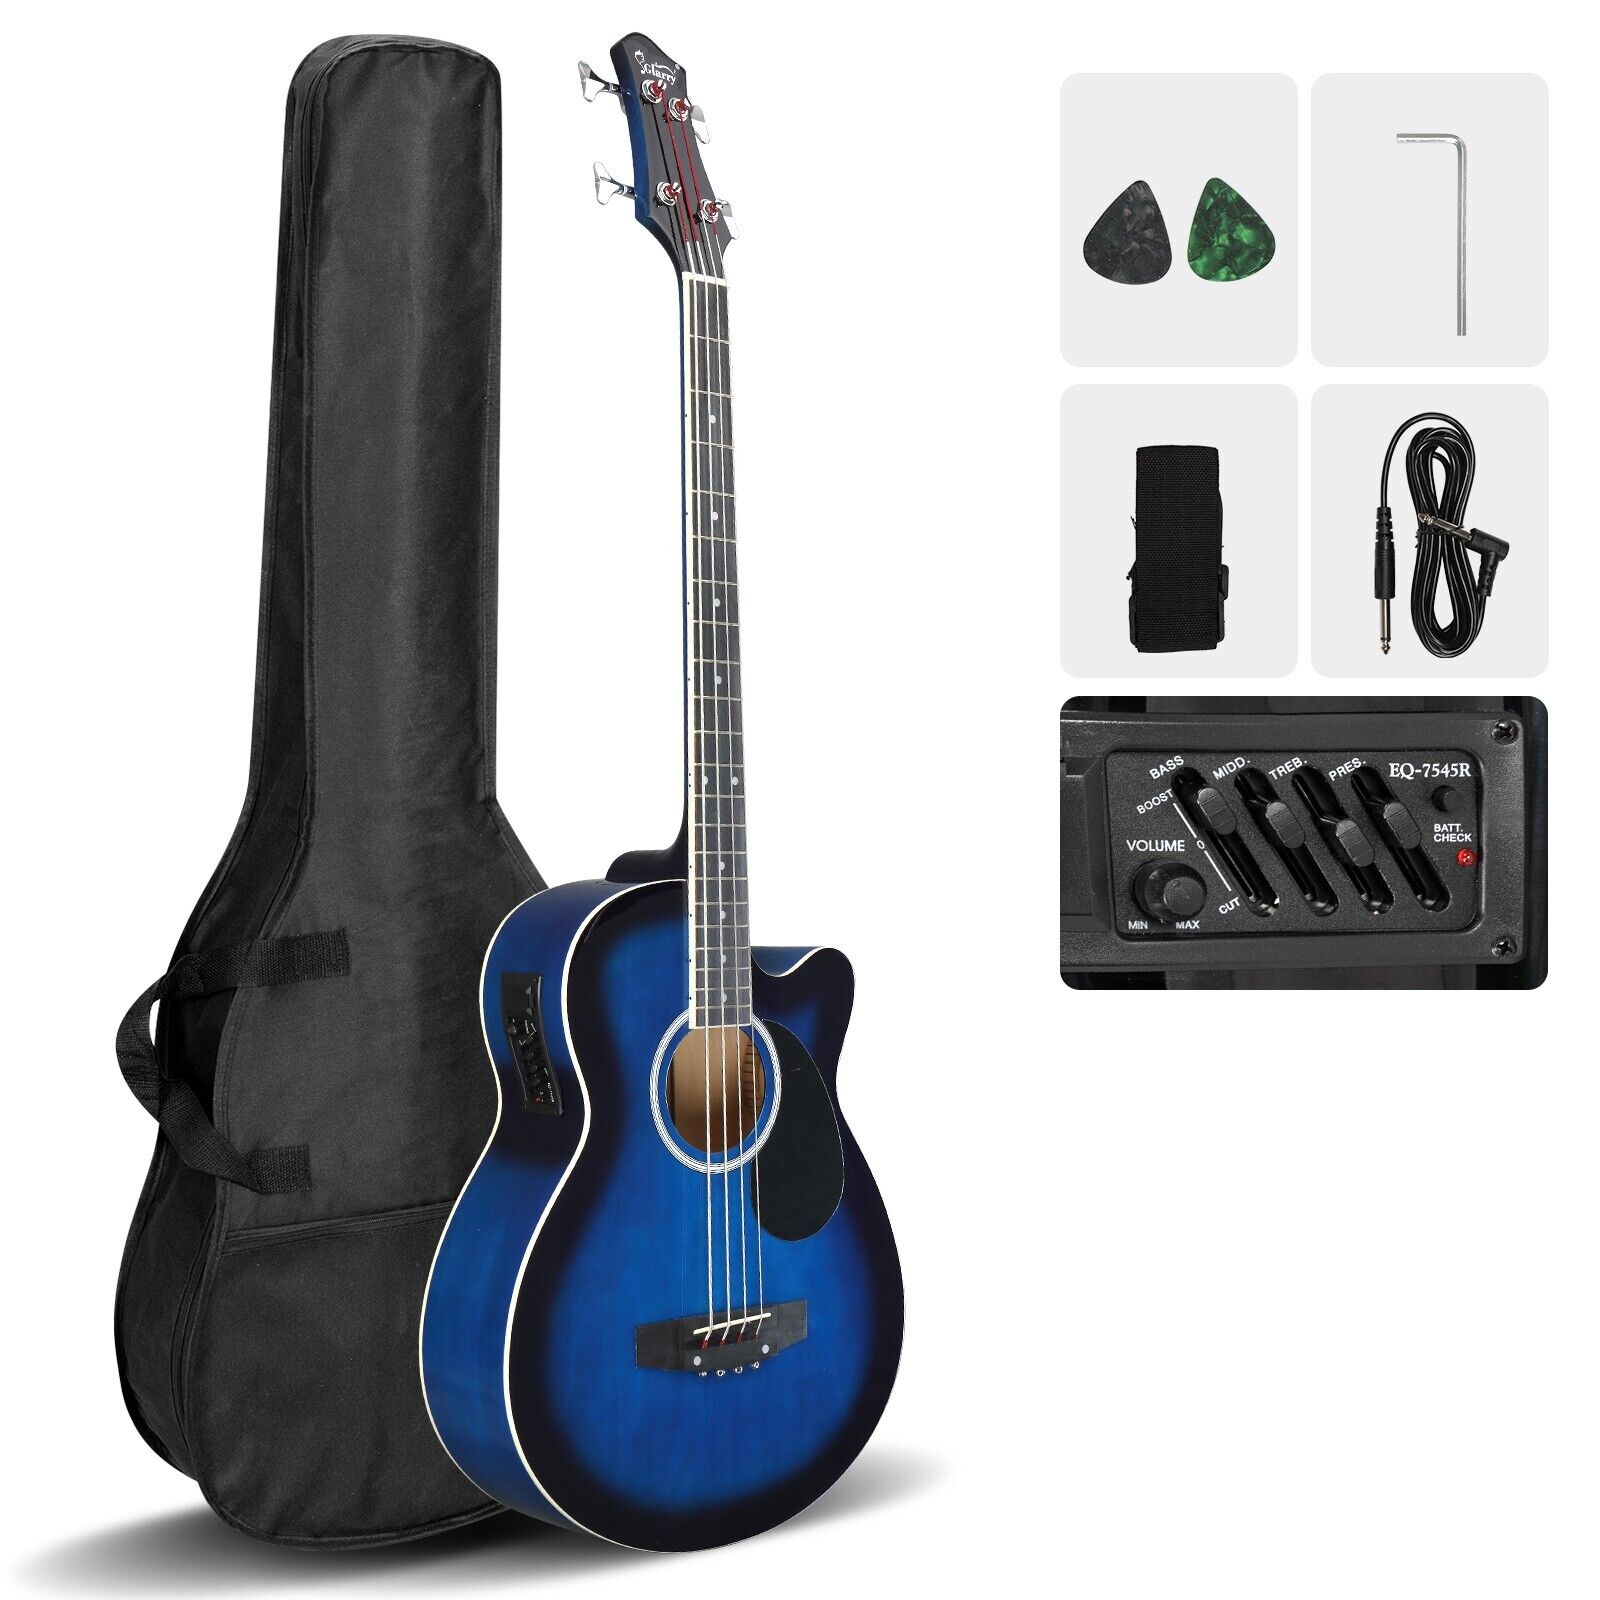 Glarry GMB101 4 string Electric Acoustic Bass Guitar w/ 4-Band Equalizer EQ7545R 1